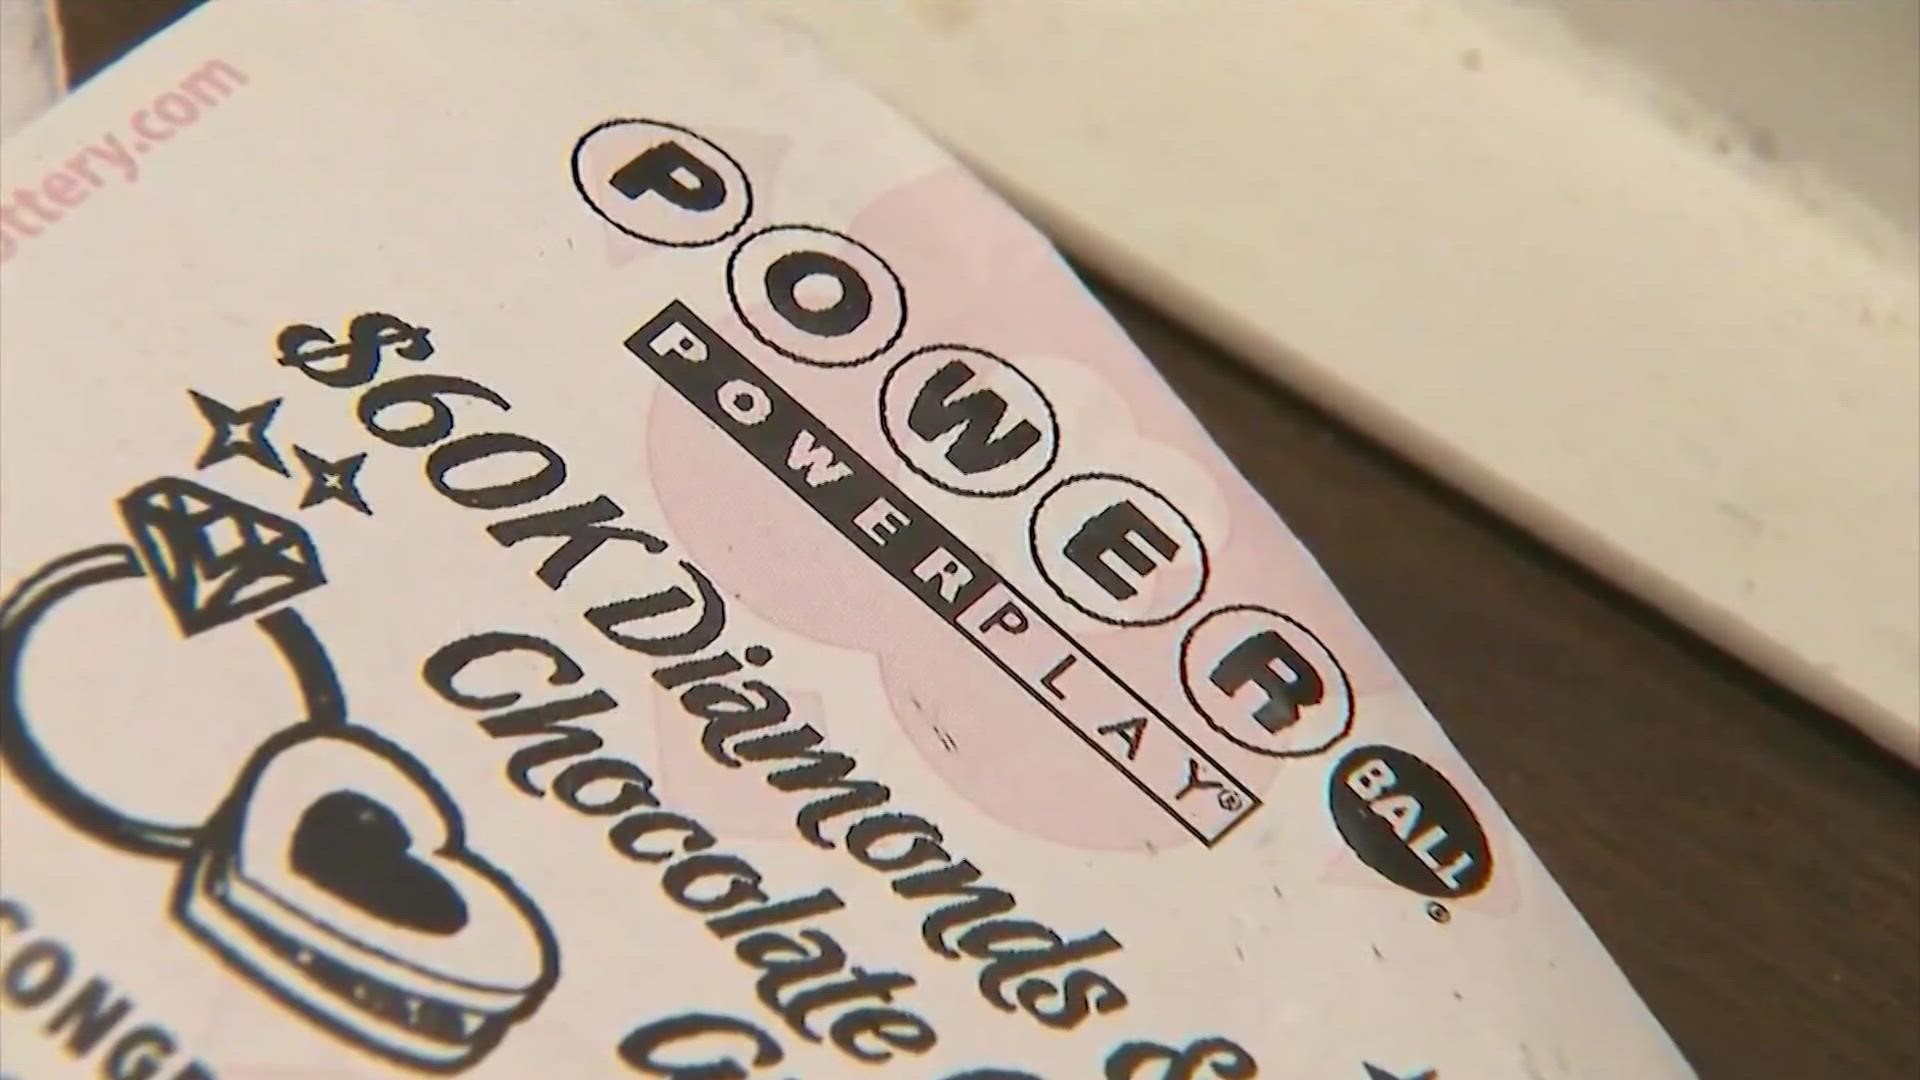 The Texas Lottery said the ticket was sold at an HEB off Highwy 6 in Bellaire.